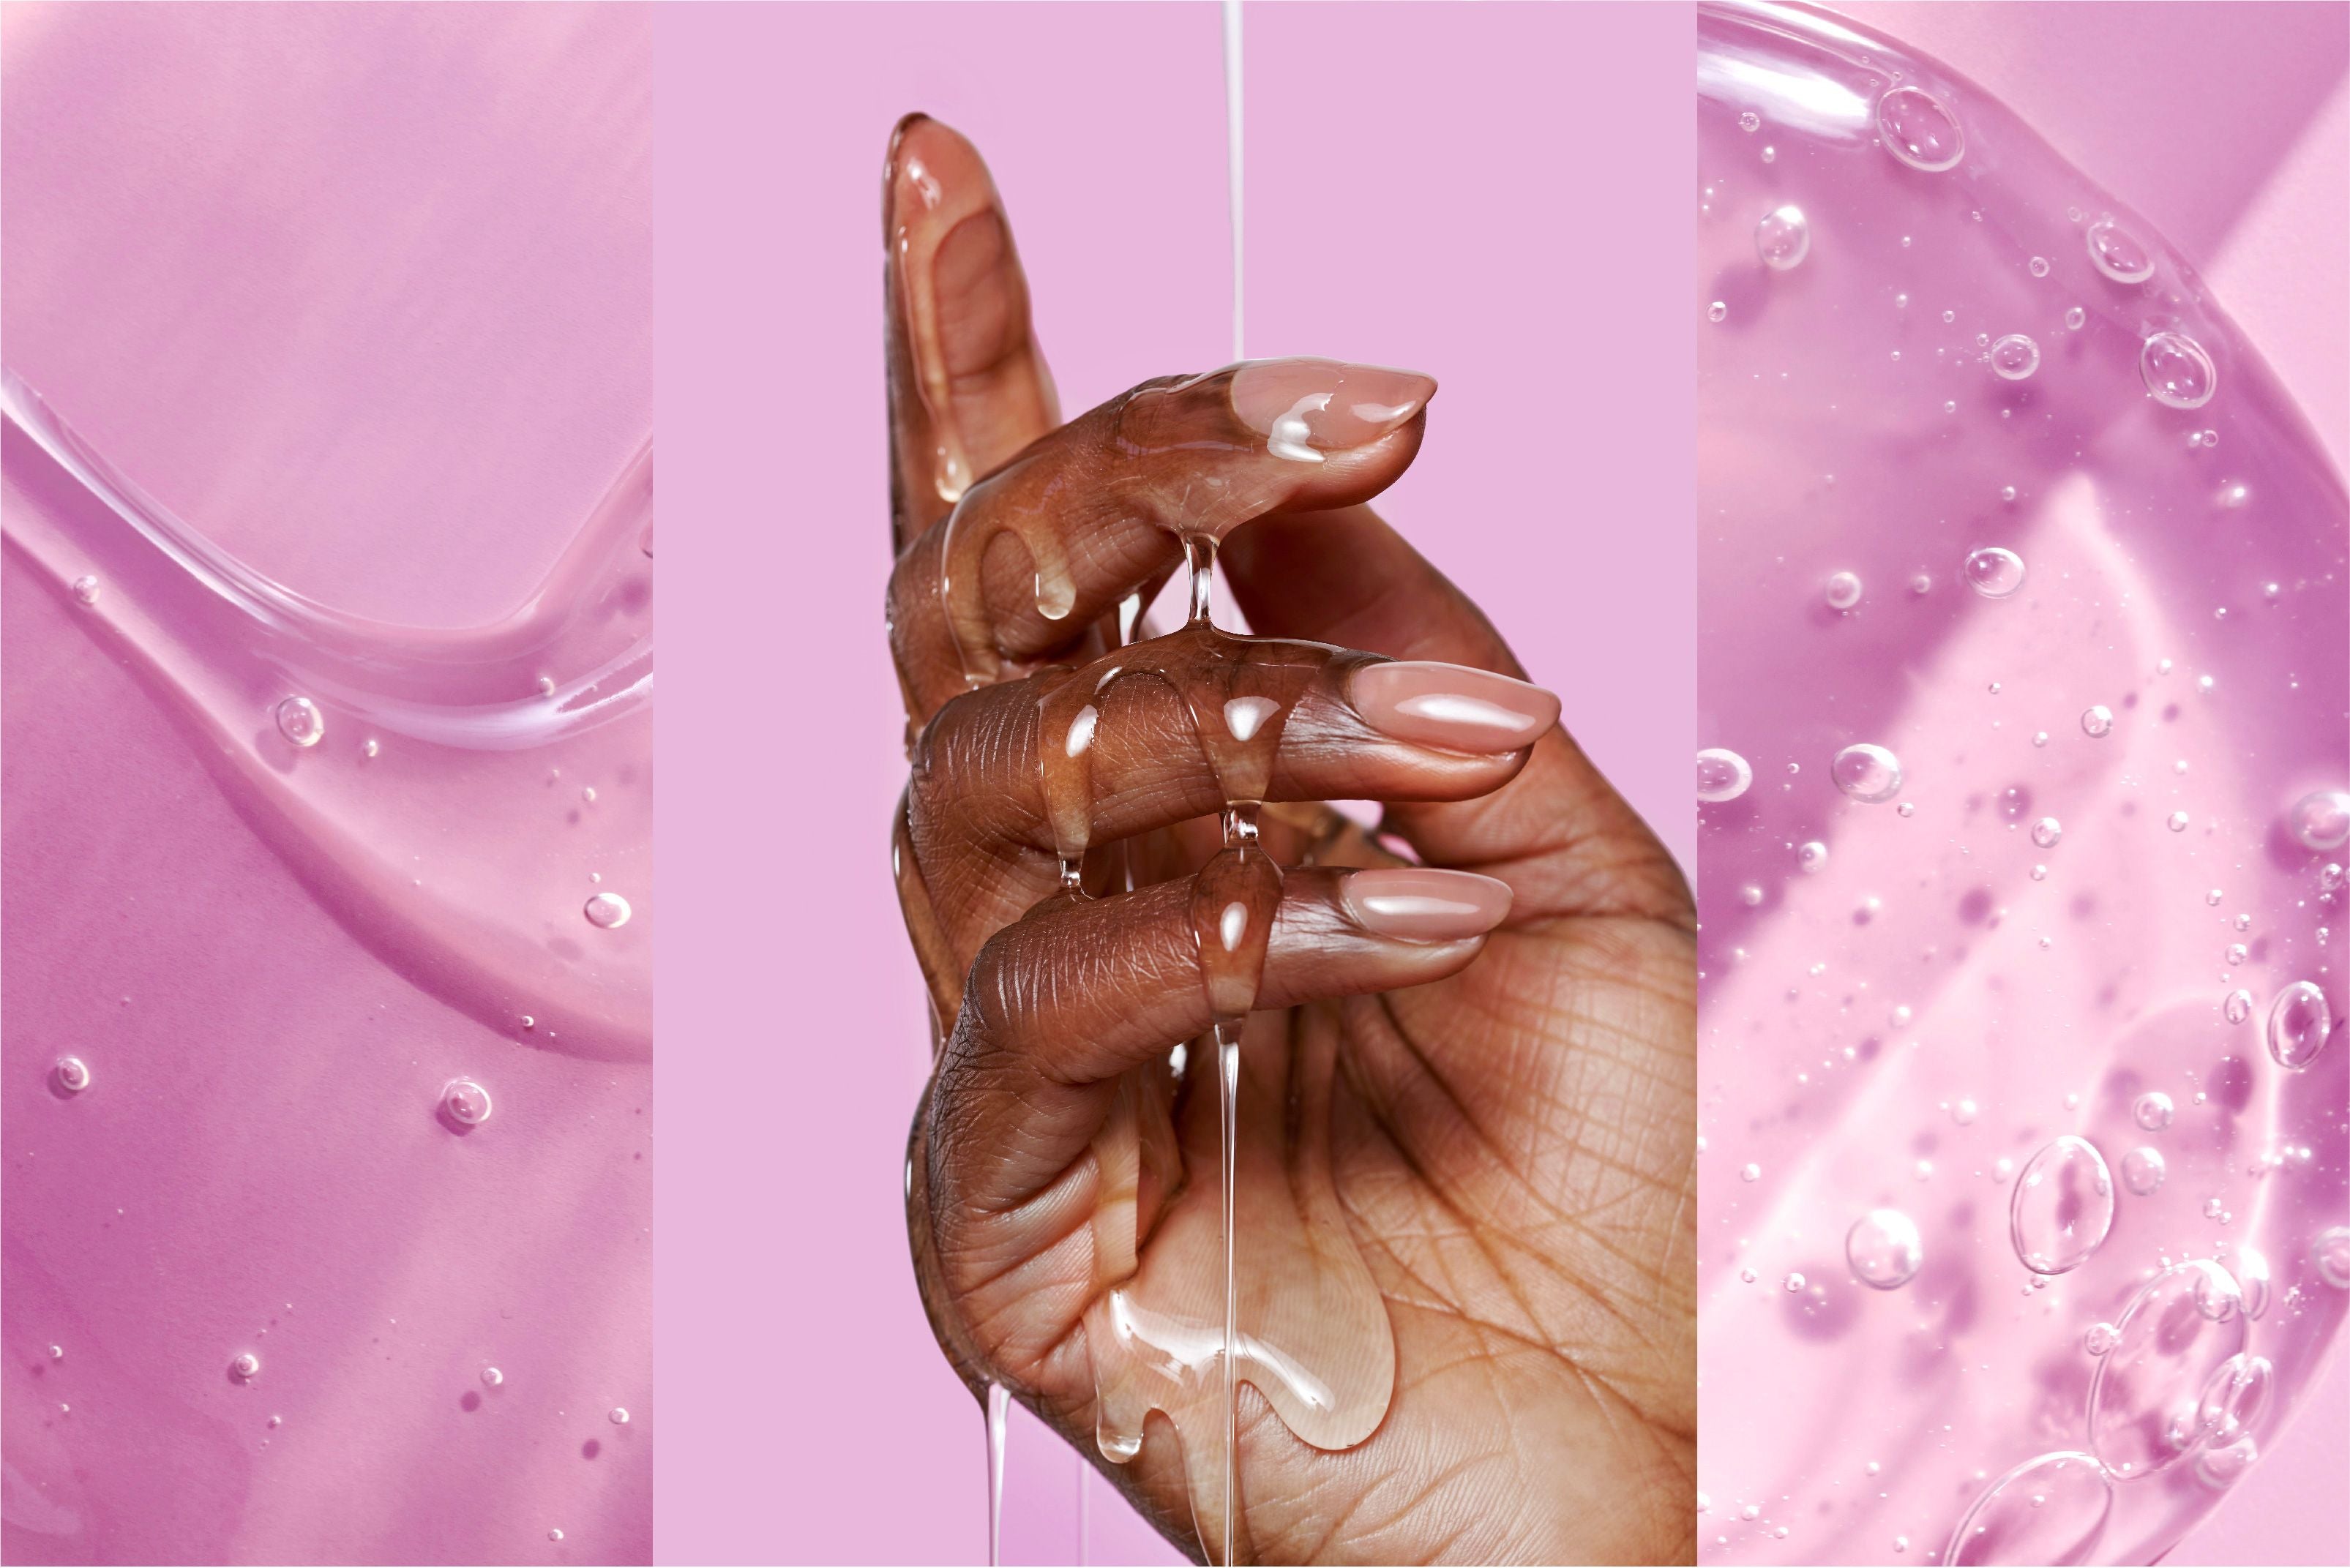 Close up of clear fluid running over a woman's hand against a pink background.